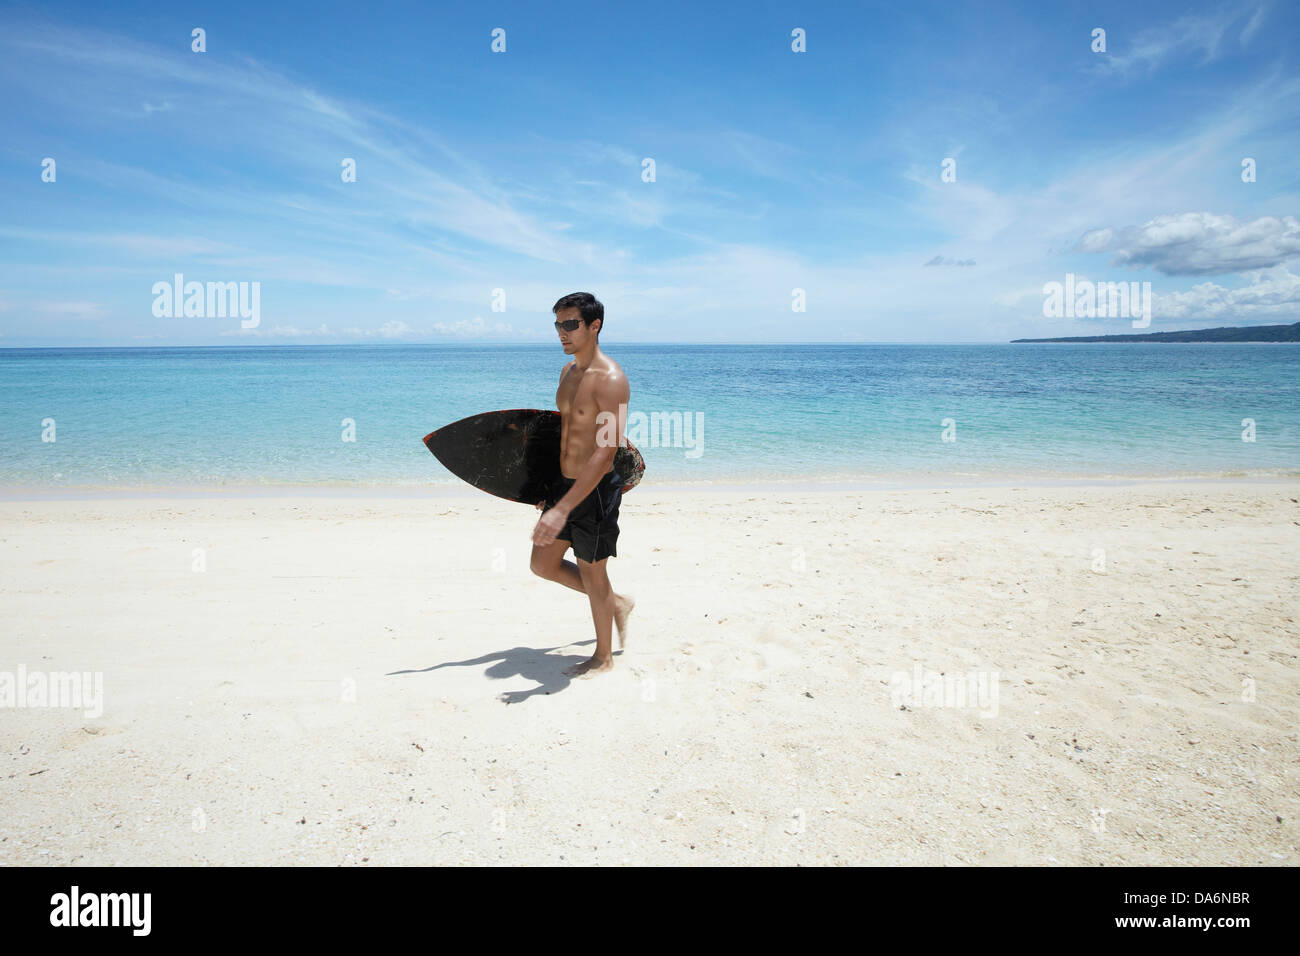 A man surfing. Stock Photo